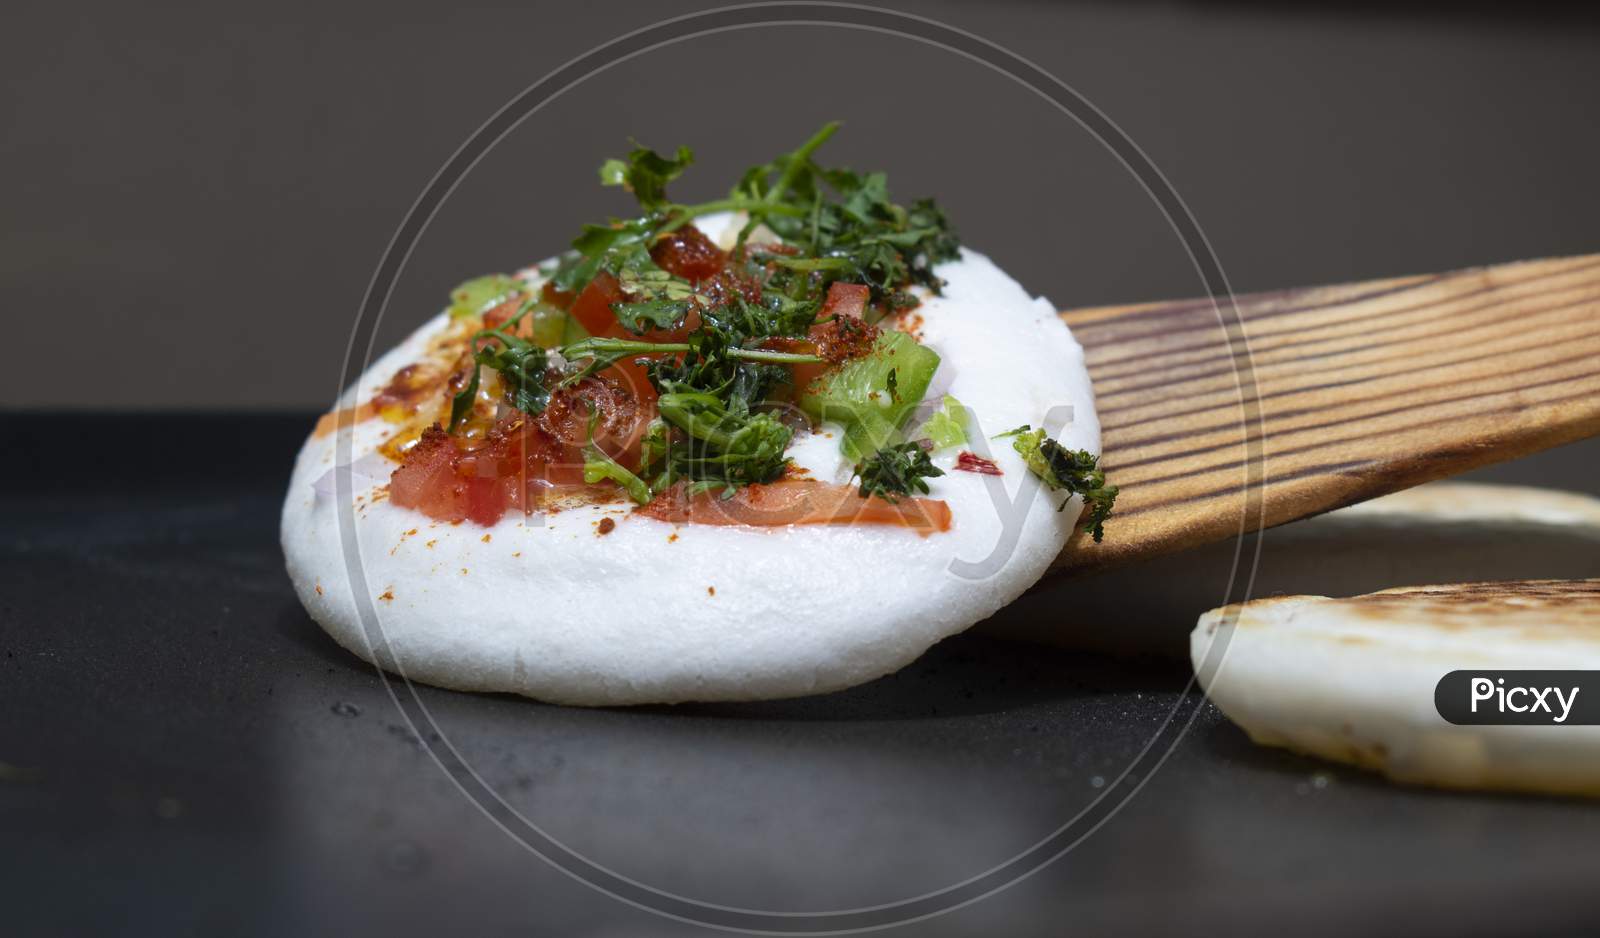 Cooking Round(Circular) White Utappam With Wooden Spatula On Hot Non Stick Pan Or Tawa